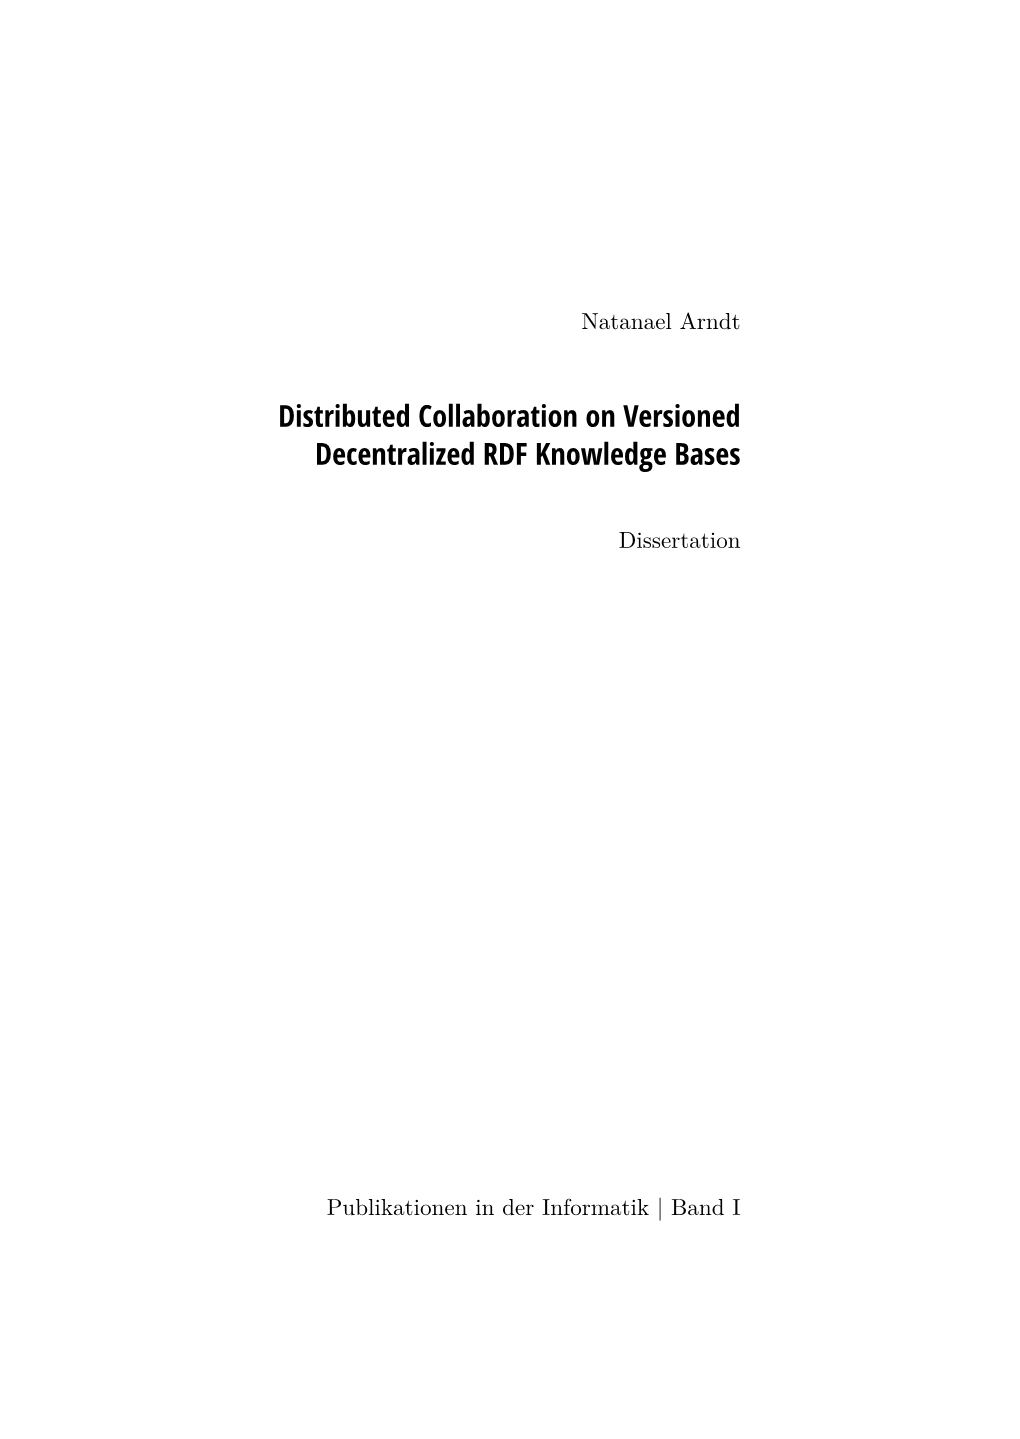 Distributed Collaboration on Versioned Decentralized RDF Knowledge Bases